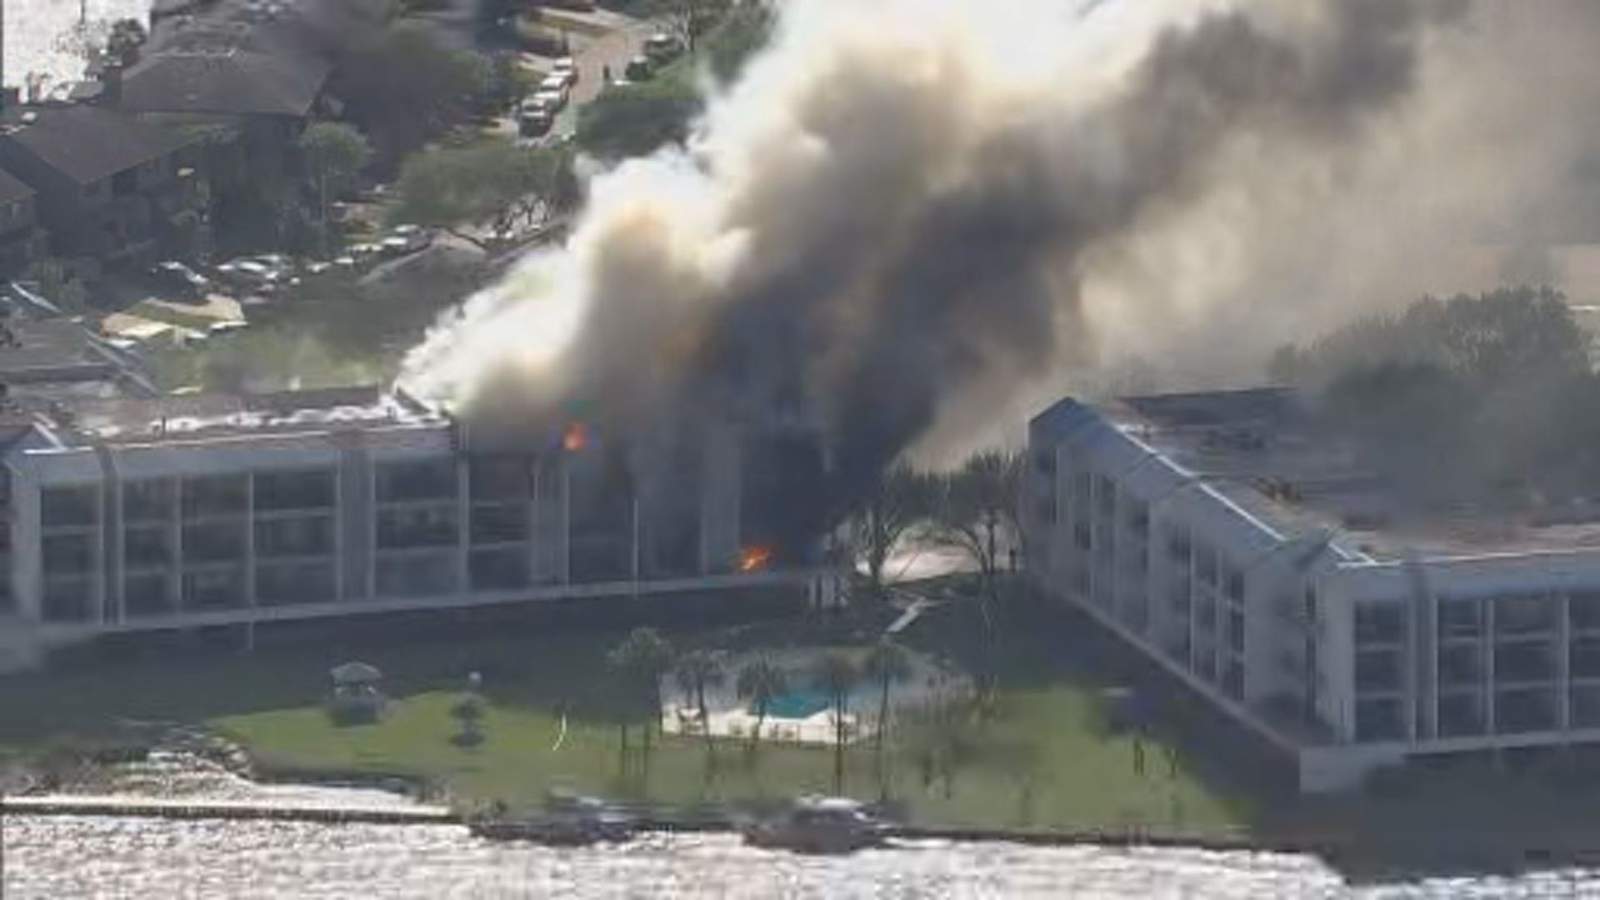 35% of condominium in Nassau Bay damaged after large fire